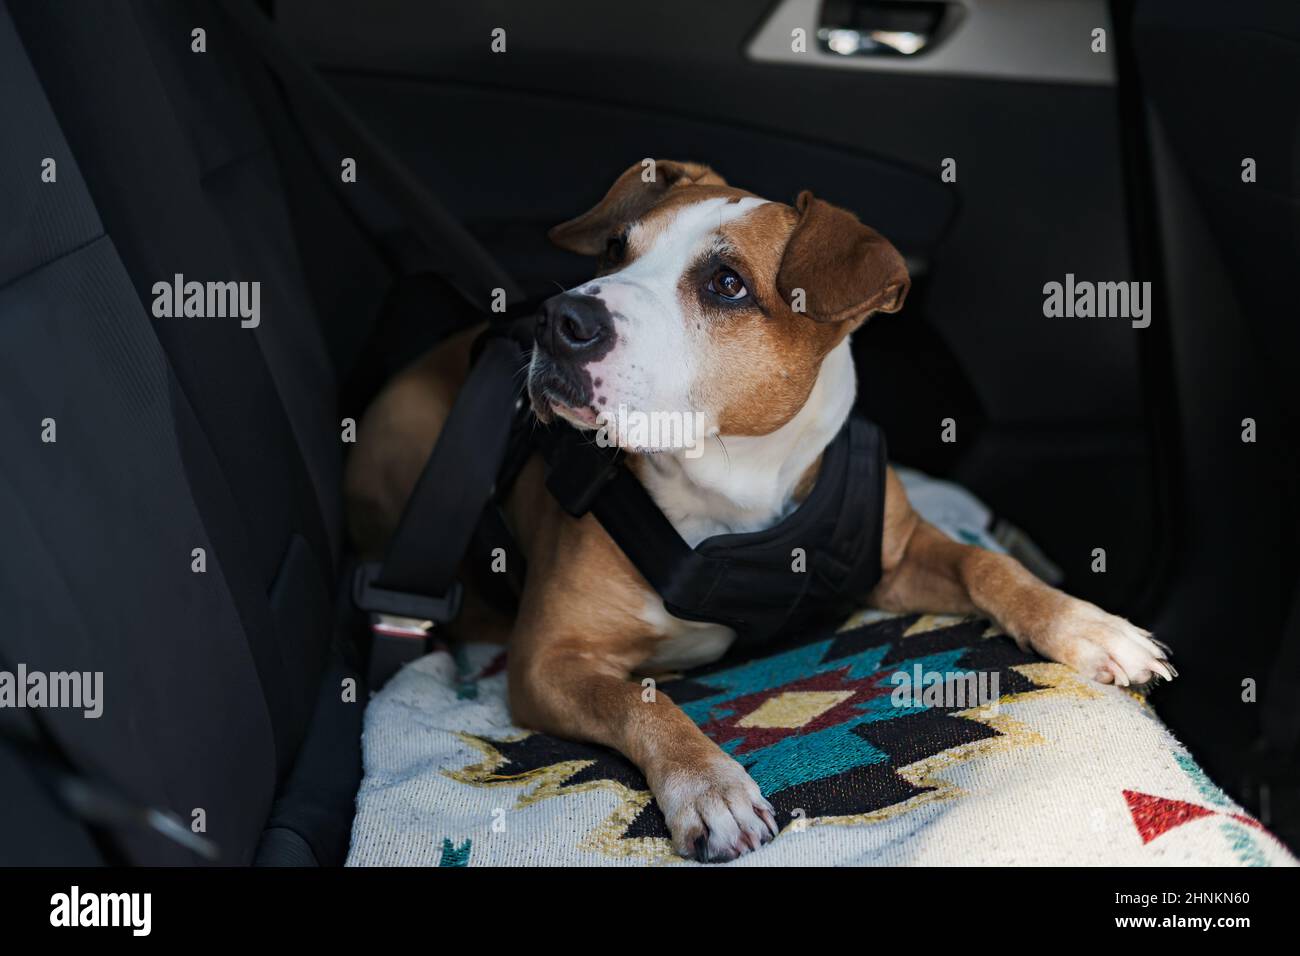 Dog wearing protective harness buckled to a car safety belt. Safe travelling or commuting by car with pets Stock Photo